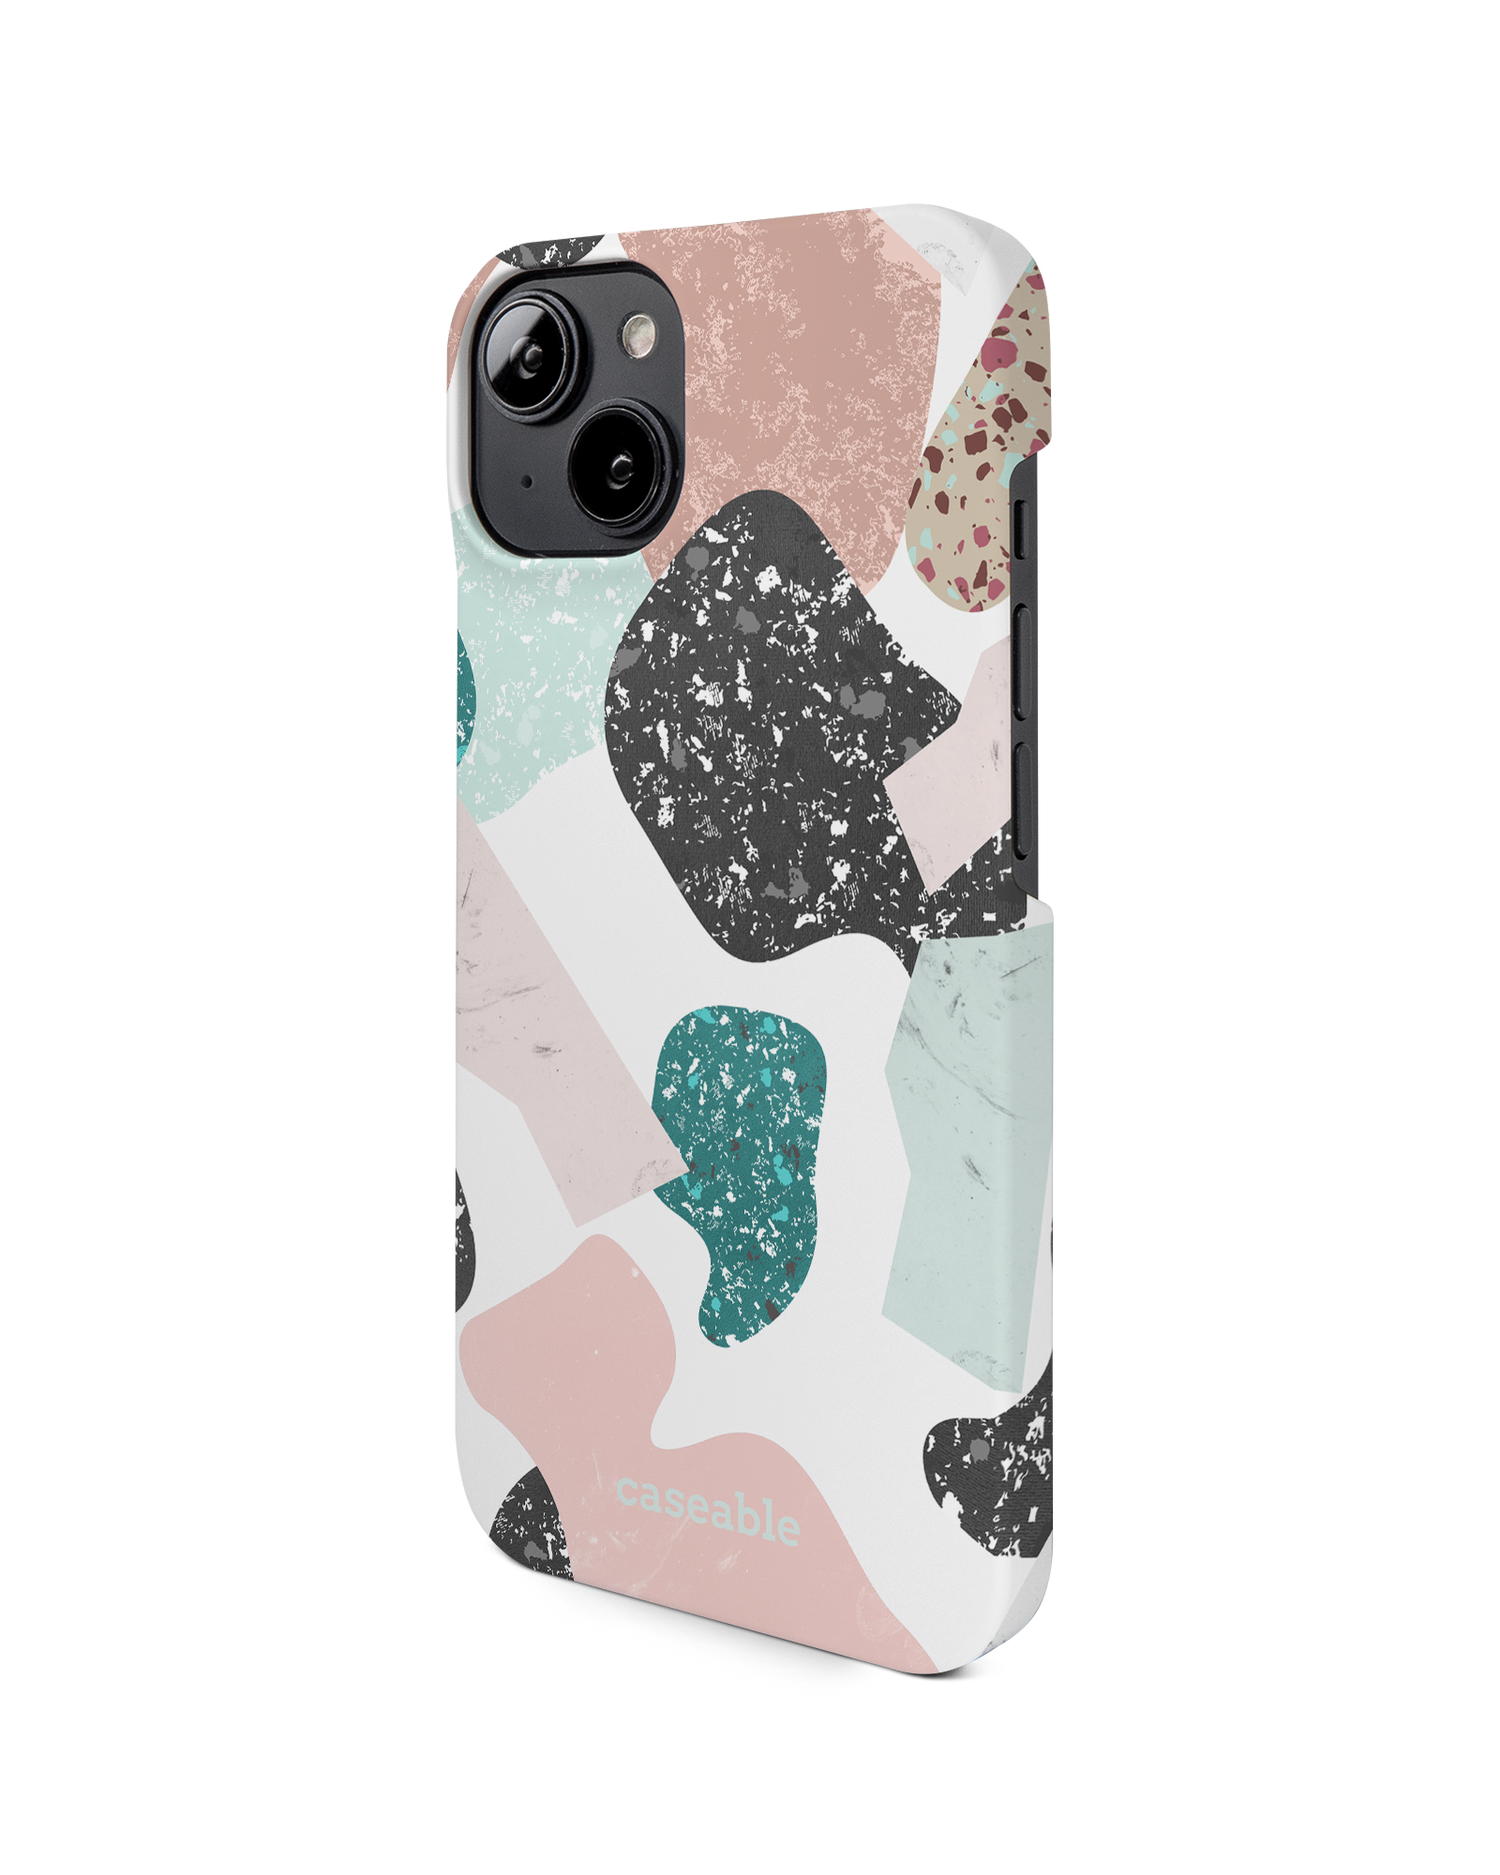 Scattered Shapes Hard Shell Phone Case for Apple iPhone 14: View from the right side